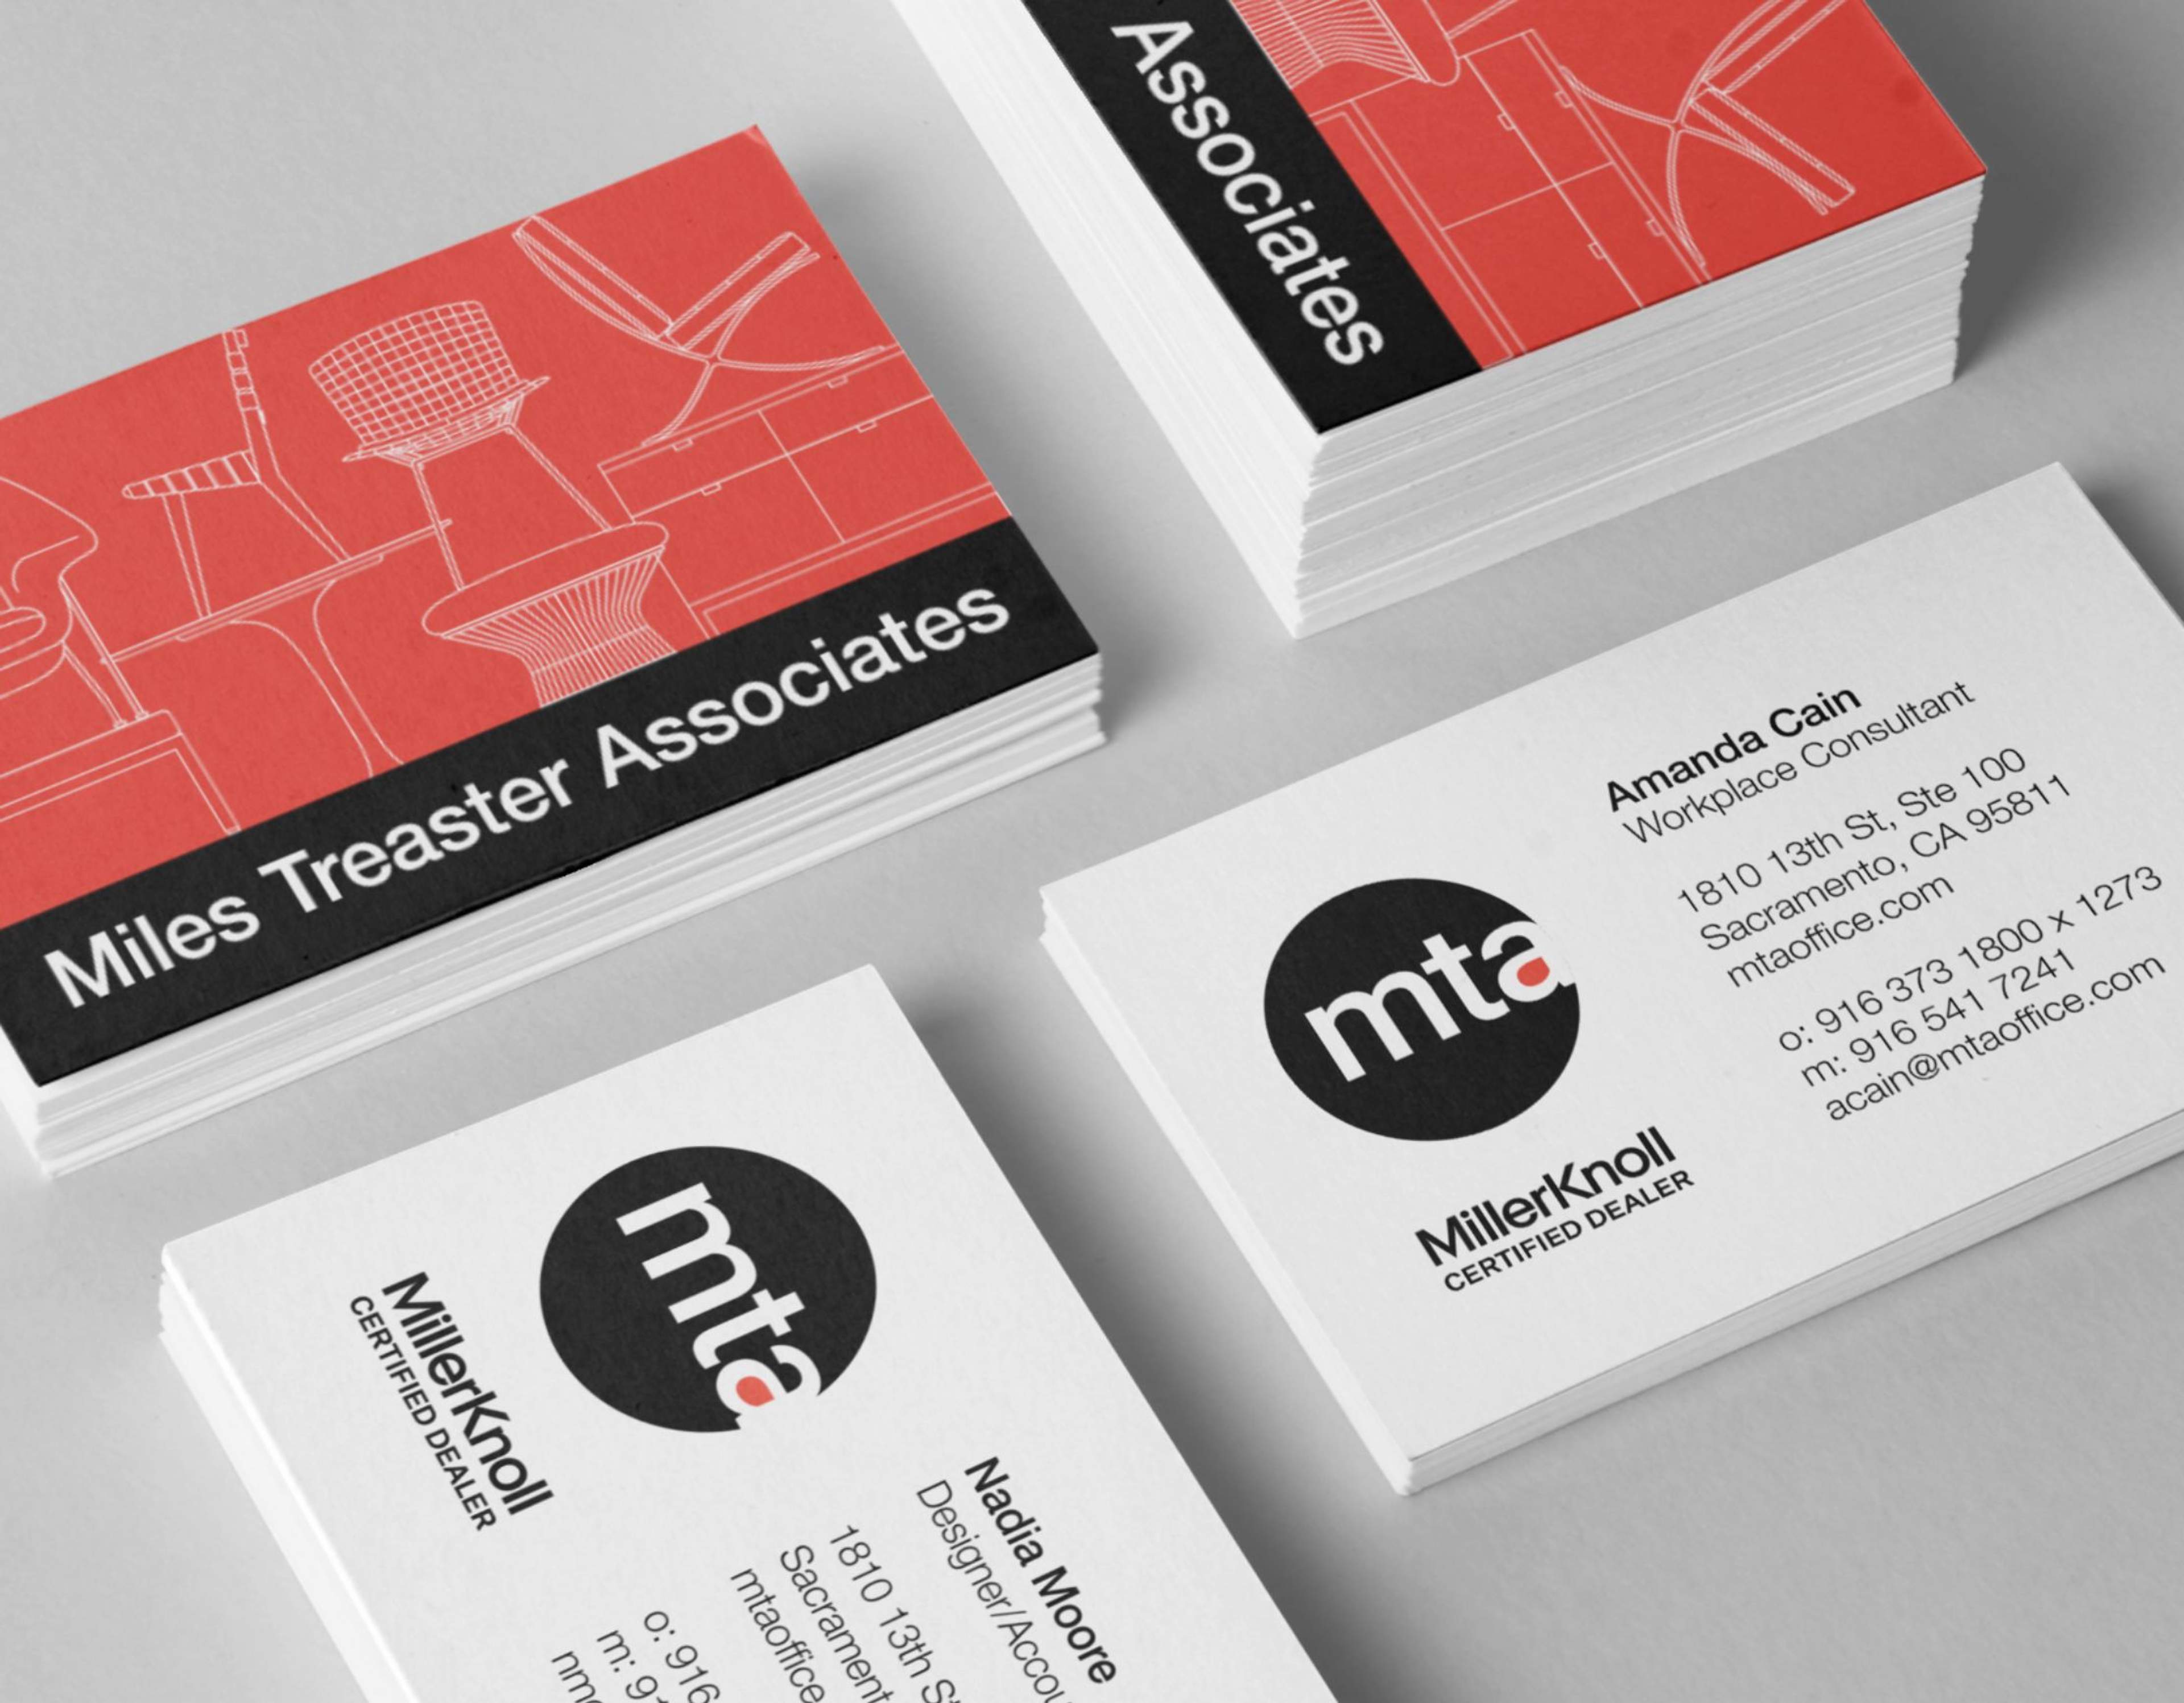 Branding and business card system for a certified MillerKnoll dealership designed and produced by Brenna Hamilton.